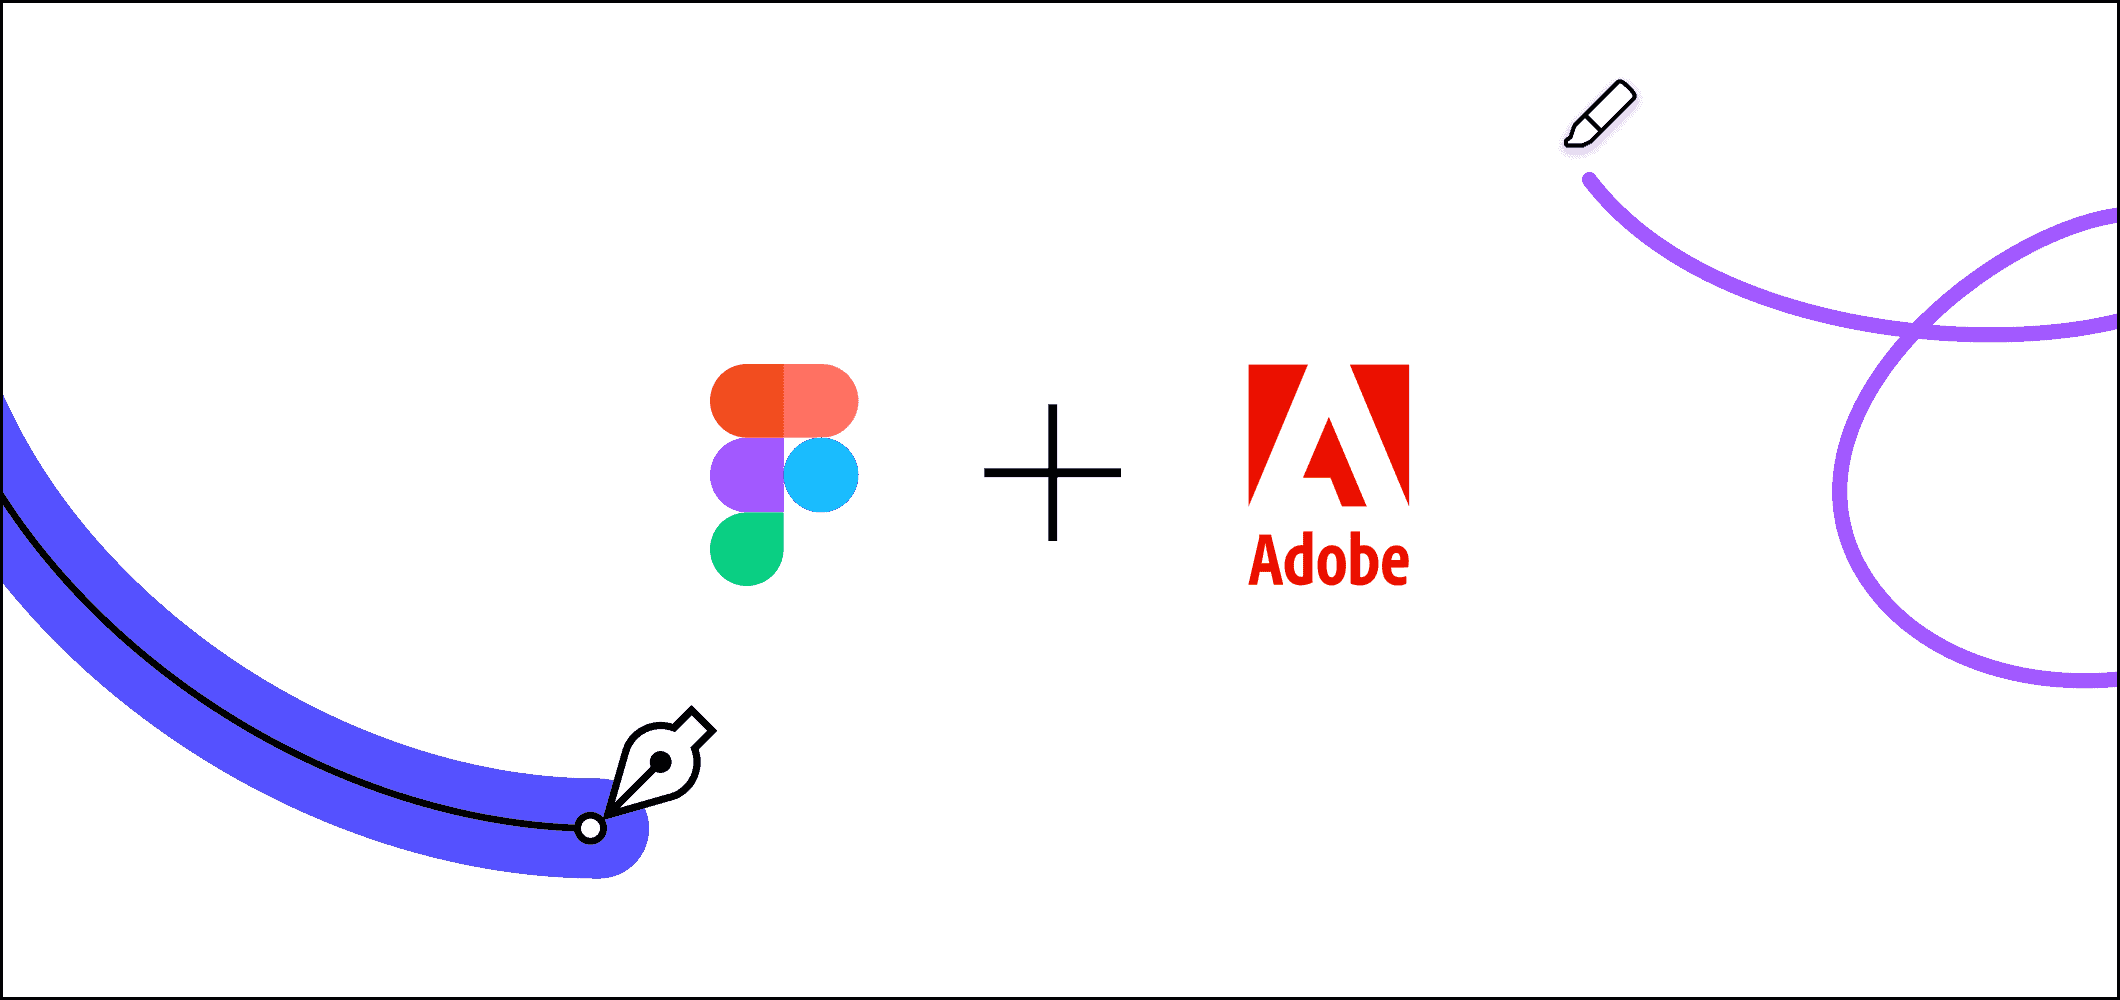 Adobe to acquire interface design tool Figma for about $20 billion